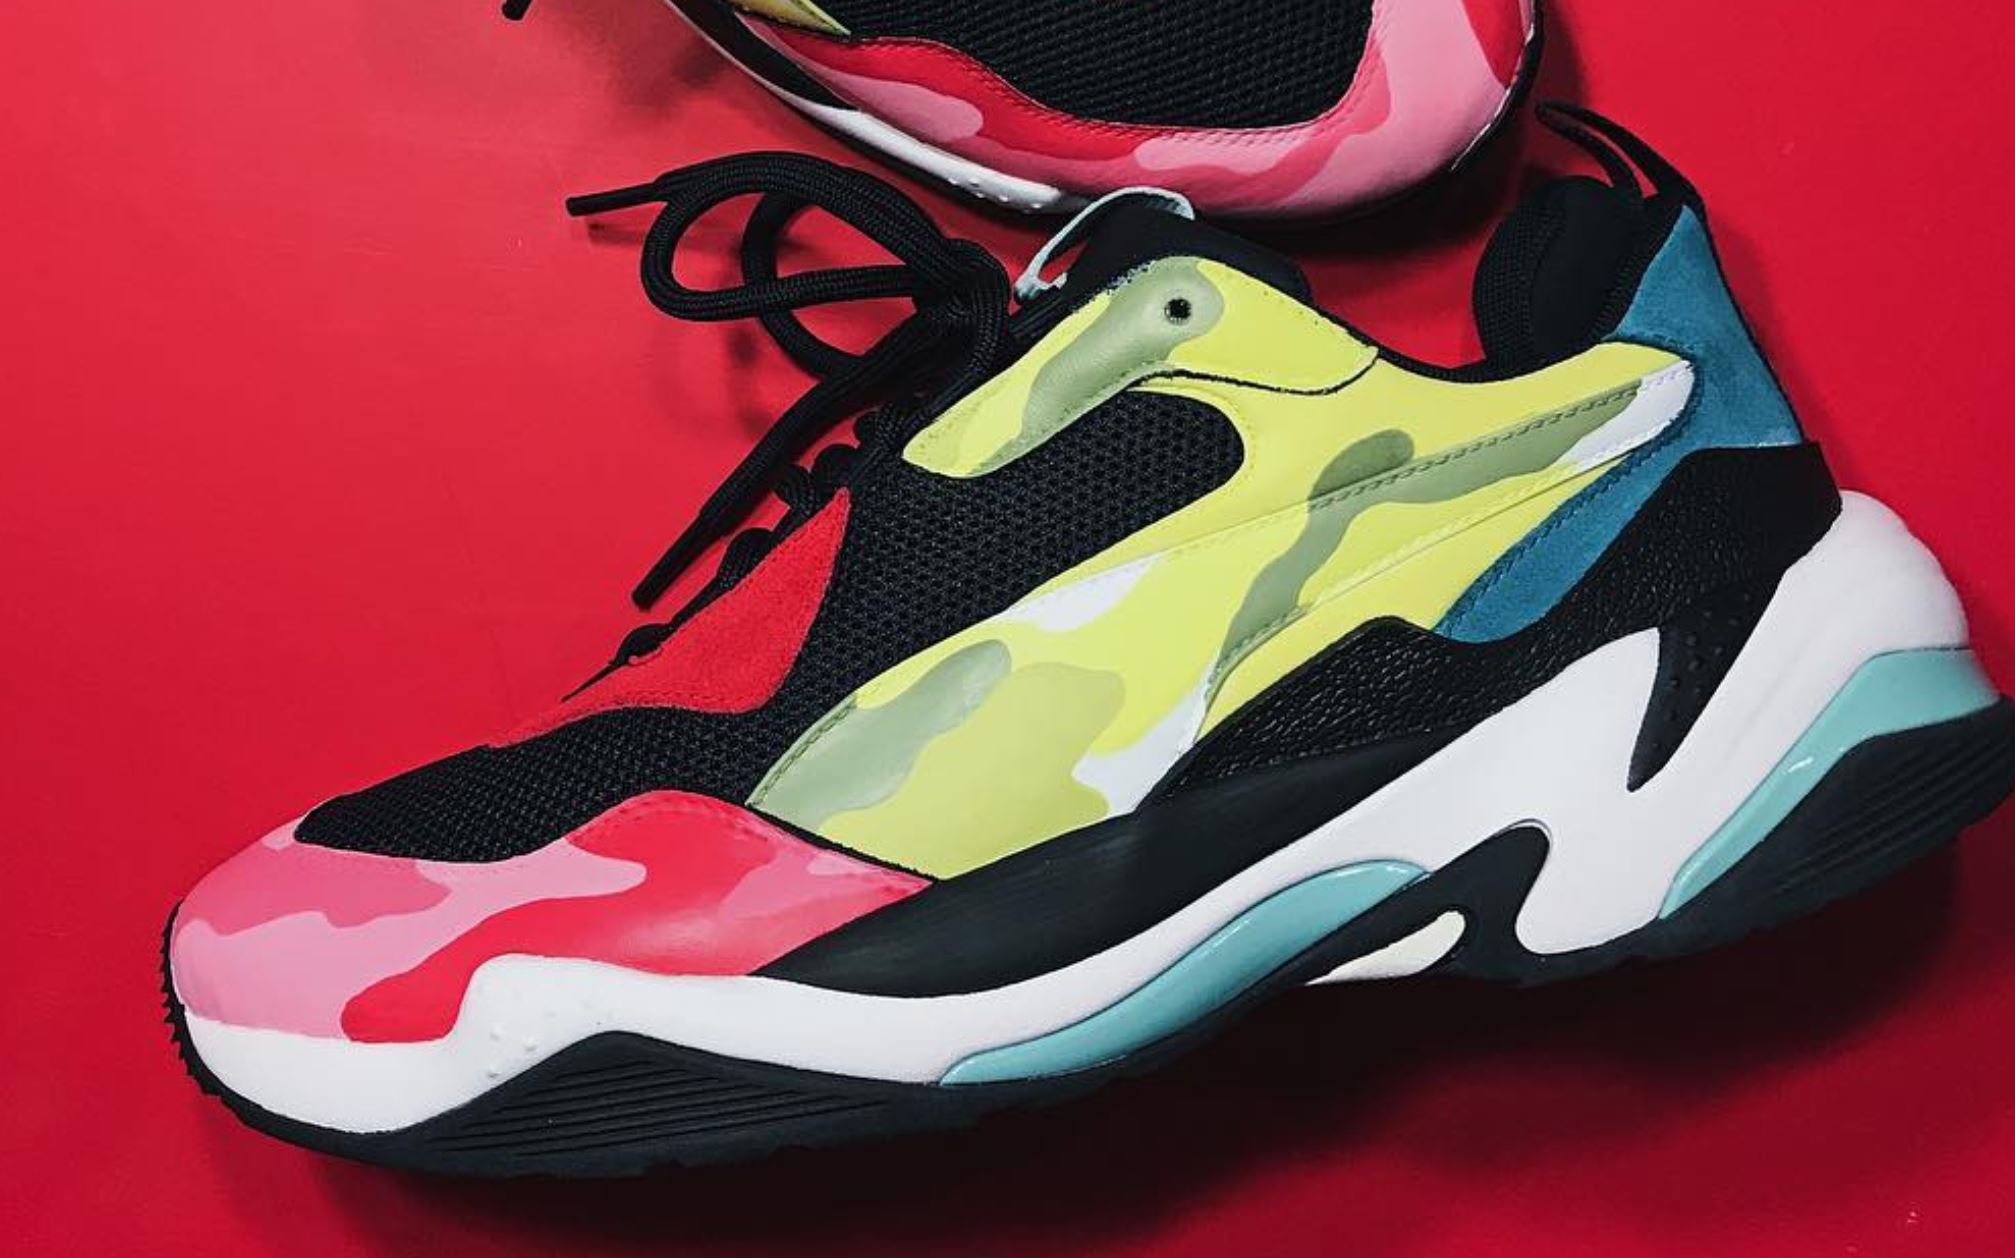 Honger Slechte factor stap This Puma Thunder Spectra Custom is a One of One - WearTesters